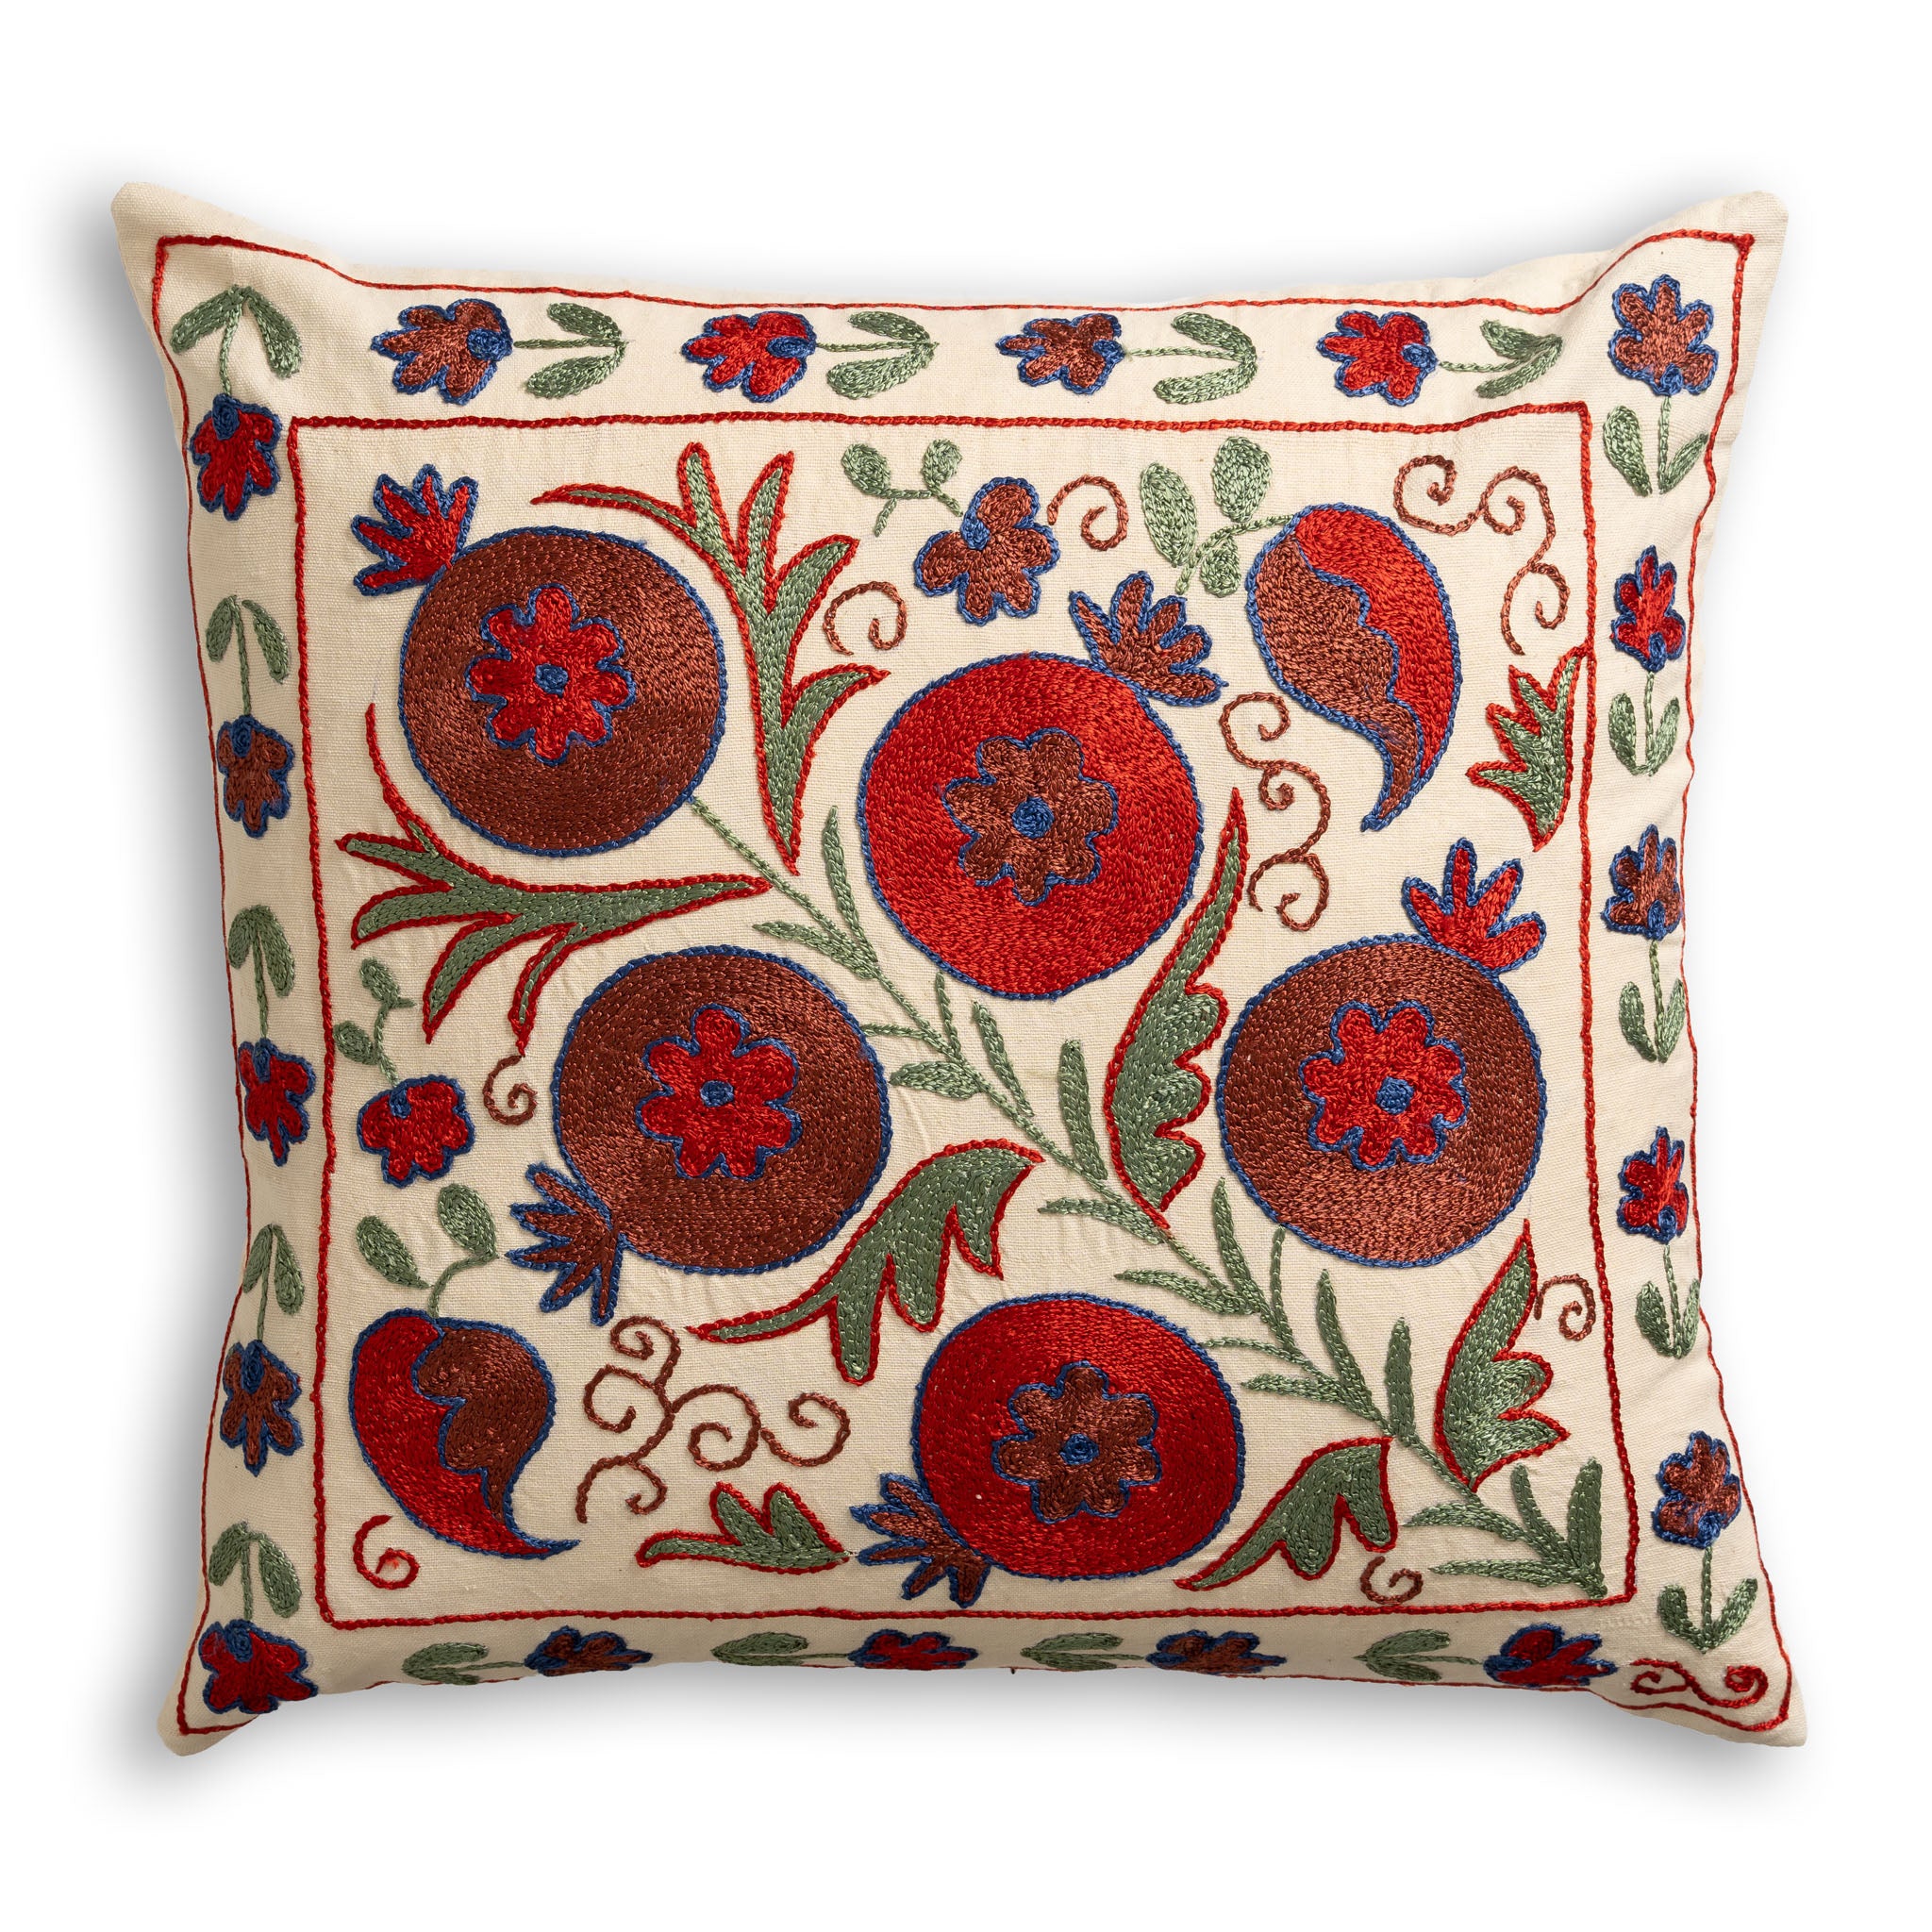 Suzani Silk Embroidered Stylised Floral Patterned Scatter Cushion on cream background with red and green floral design